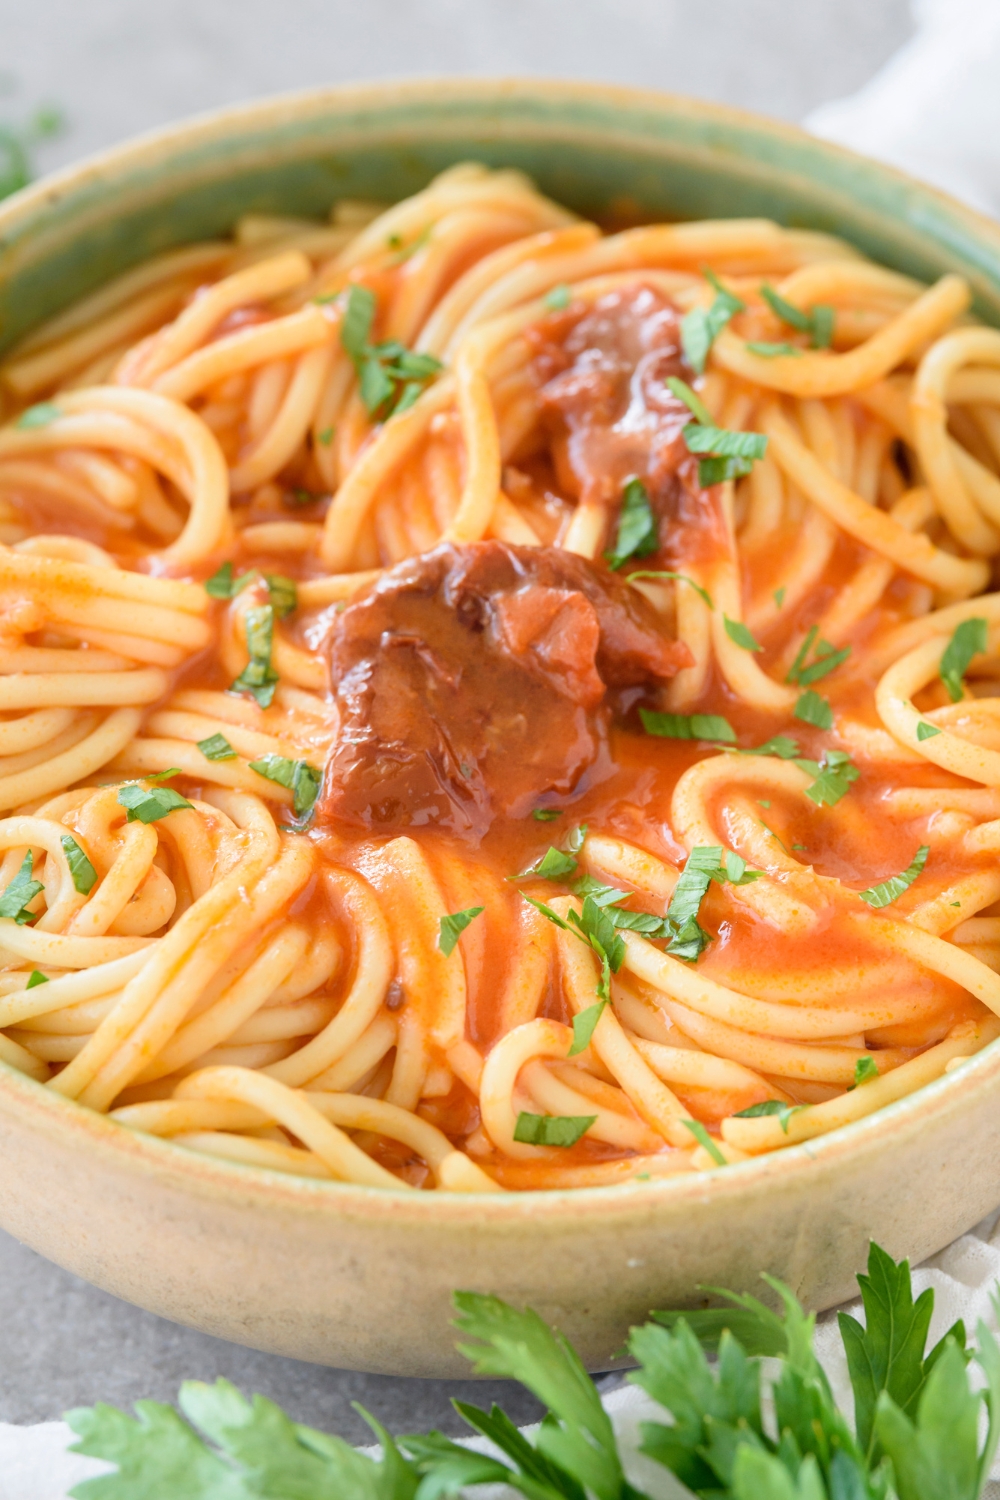 A bowl of spaghetti noodles covered in tomato sauce.